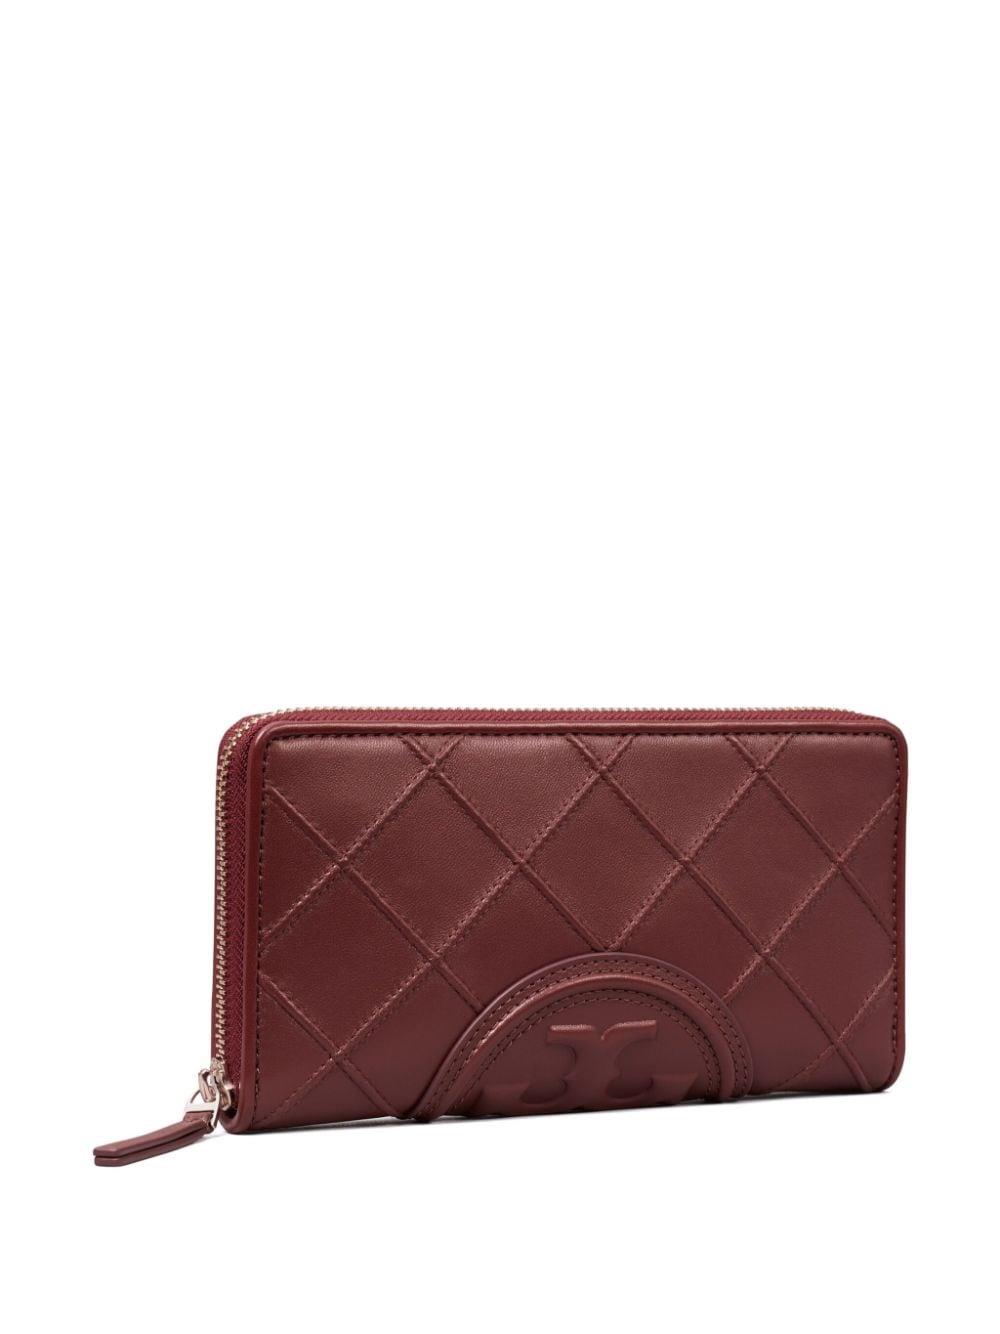 Tory Burch Fleming leather wallet - Red